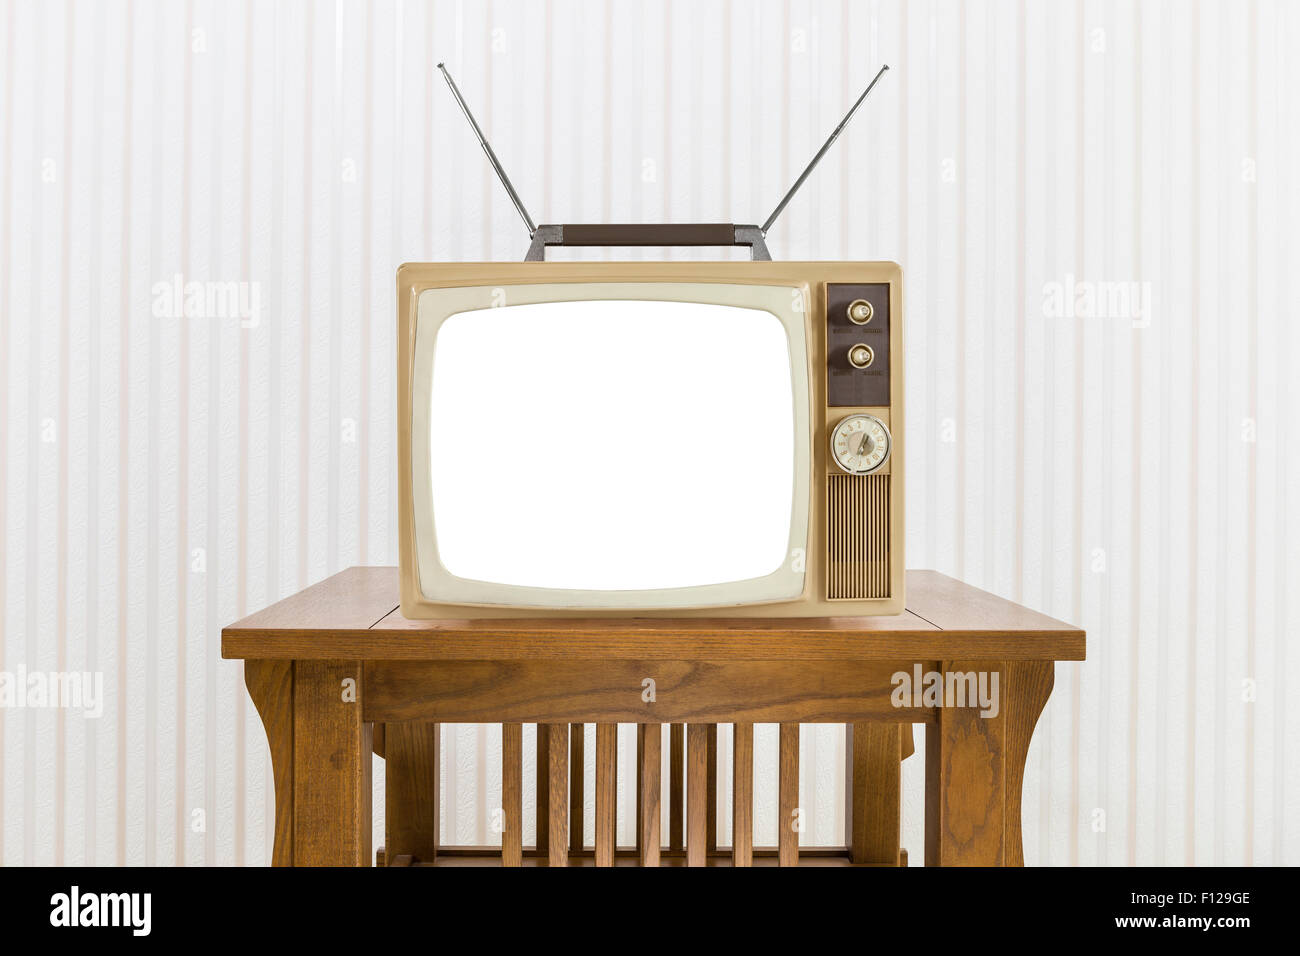 Old television with antenna on wood table with cut out screen. Stock Photo